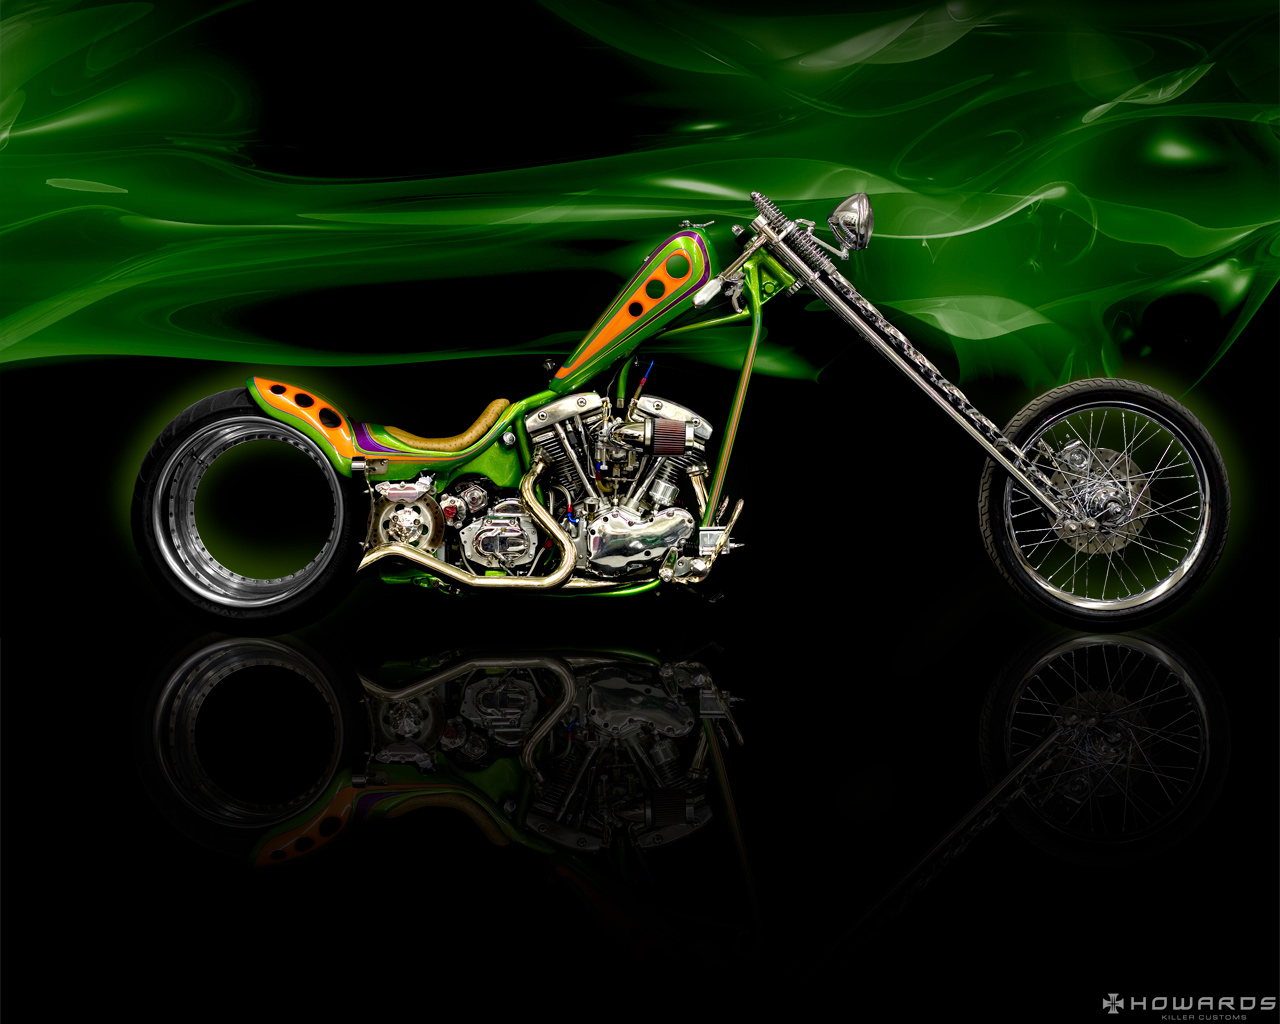 Awesome Bike Image - Happy Monday Harley Davidson , HD Wallpaper & Backgrounds